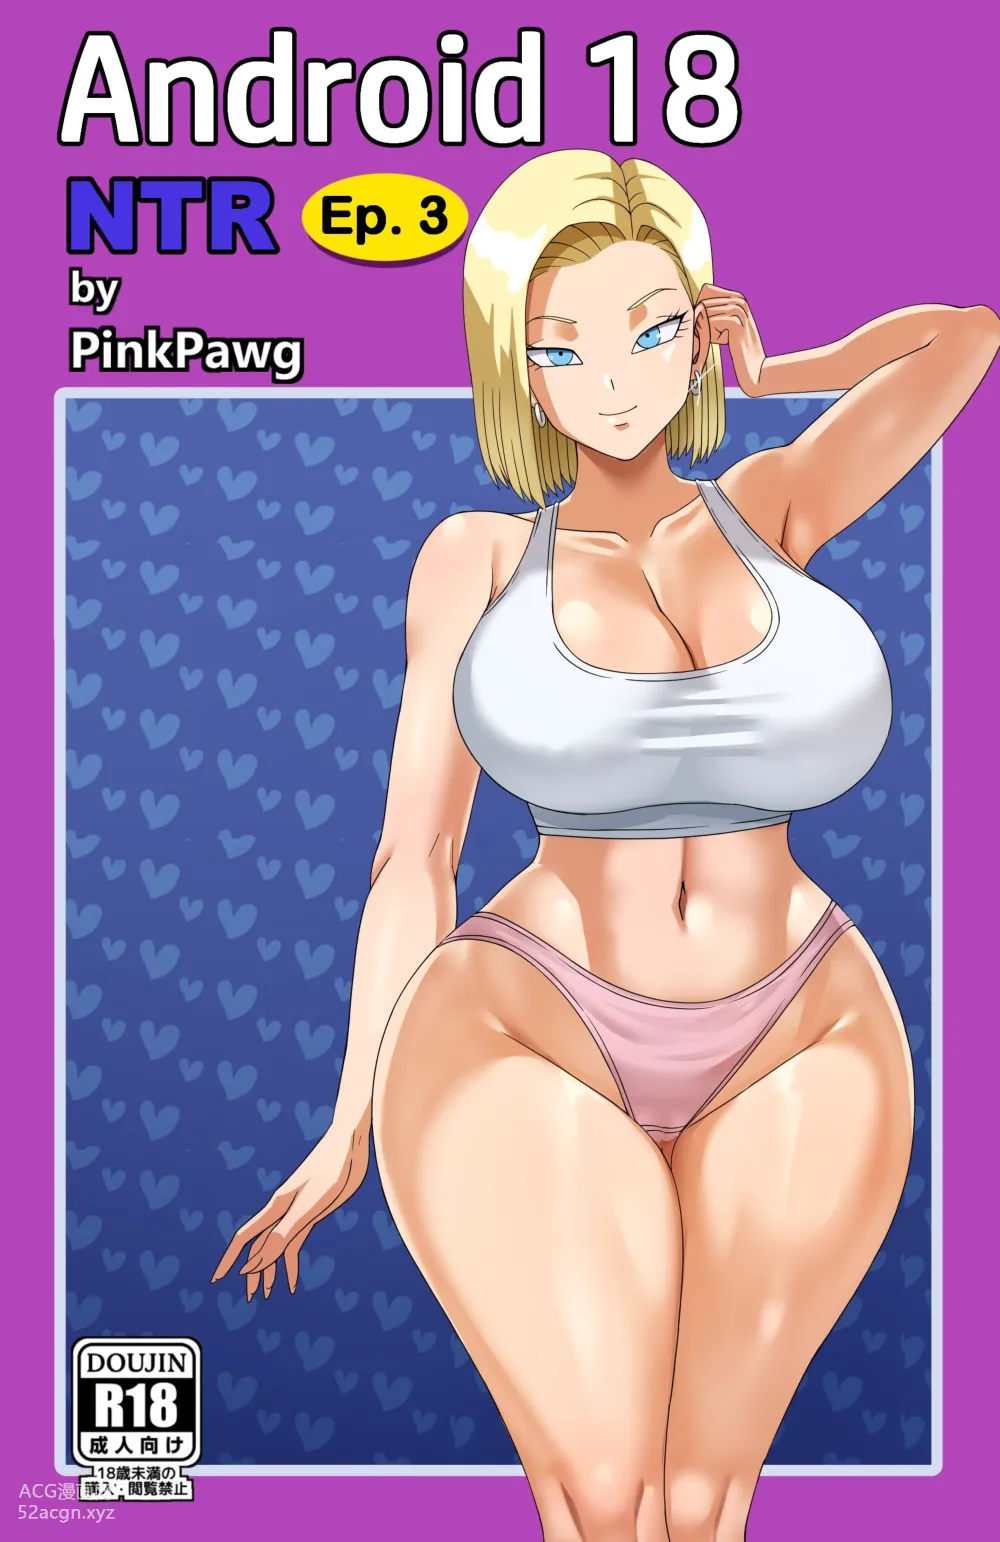 Android 18 Porn Comic - Android 18 NTR - Chapter 1 (Dragon Ball Super) - Western Porn Comics  Western Adult Comix